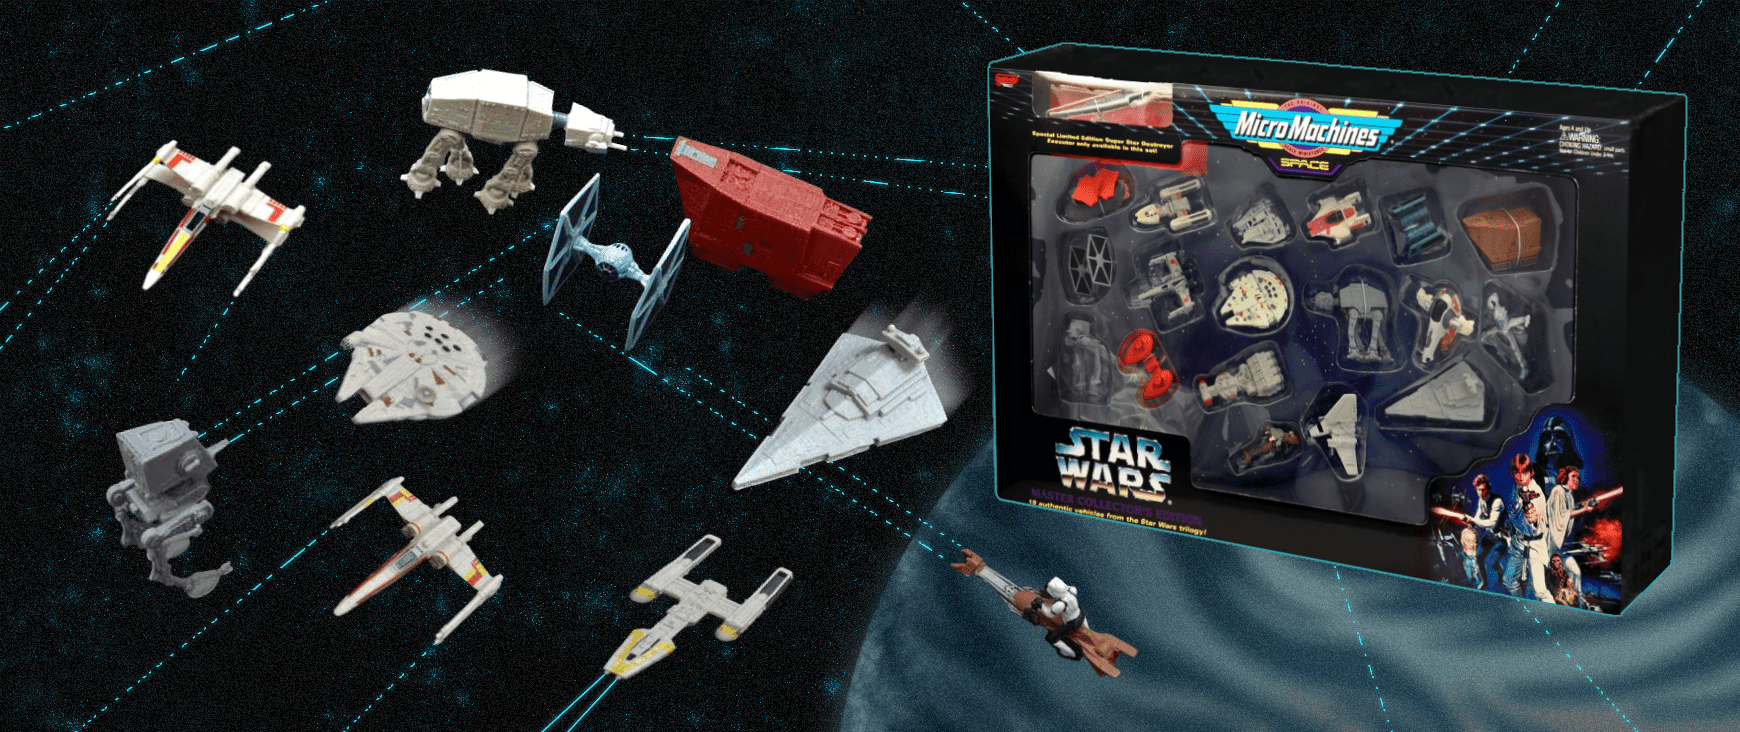 20 Rare and Expensive Star Wars Toys From the 90s and Early 2000s